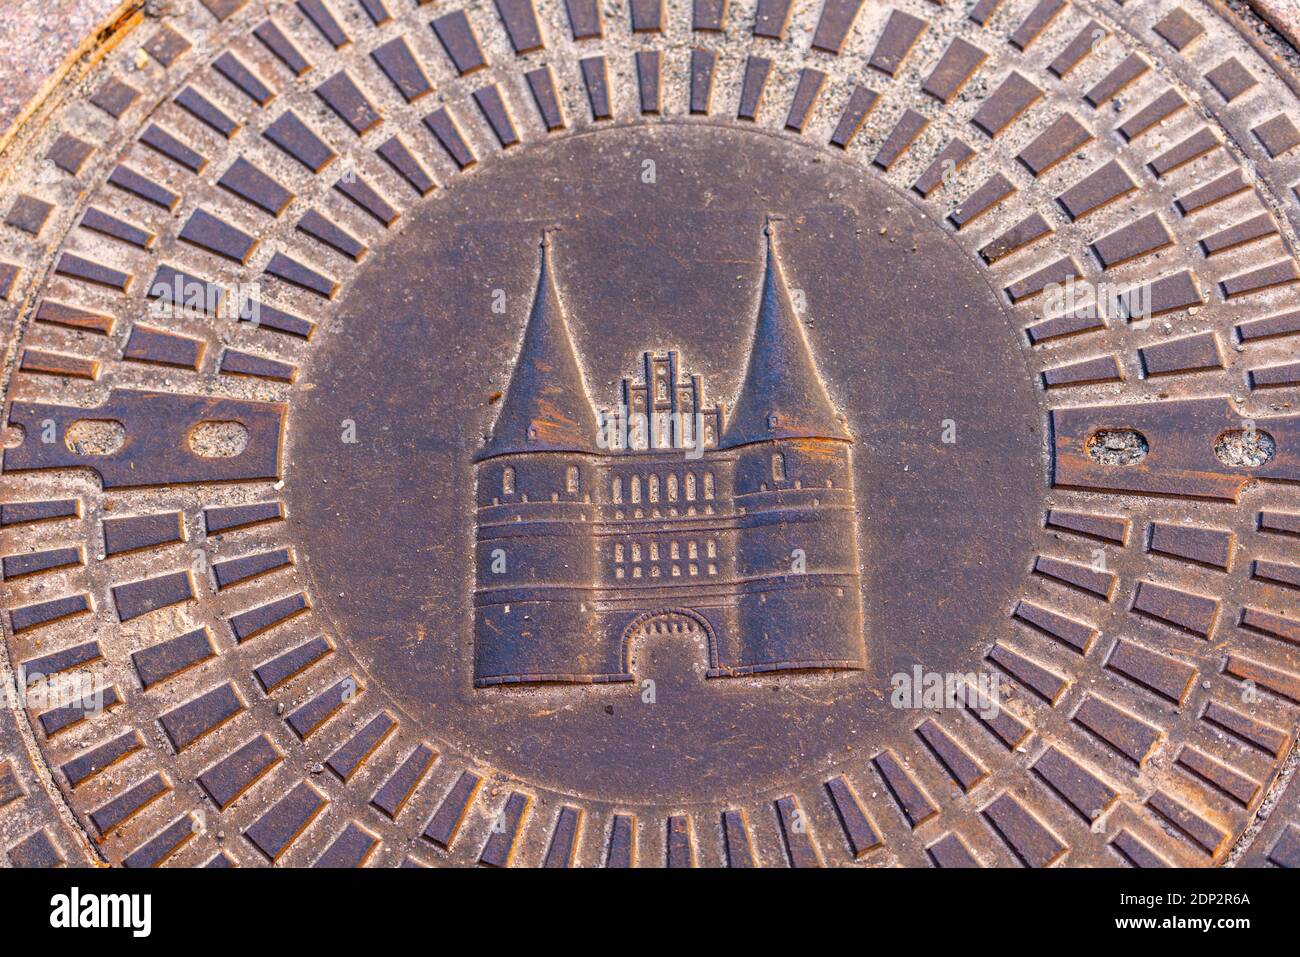 Manhole cover with Lübeck emblem of historic Holsten Gate, Hanseatic City of Lübeck, Schleswig-Holstein, North germany, Europe Stock Photo